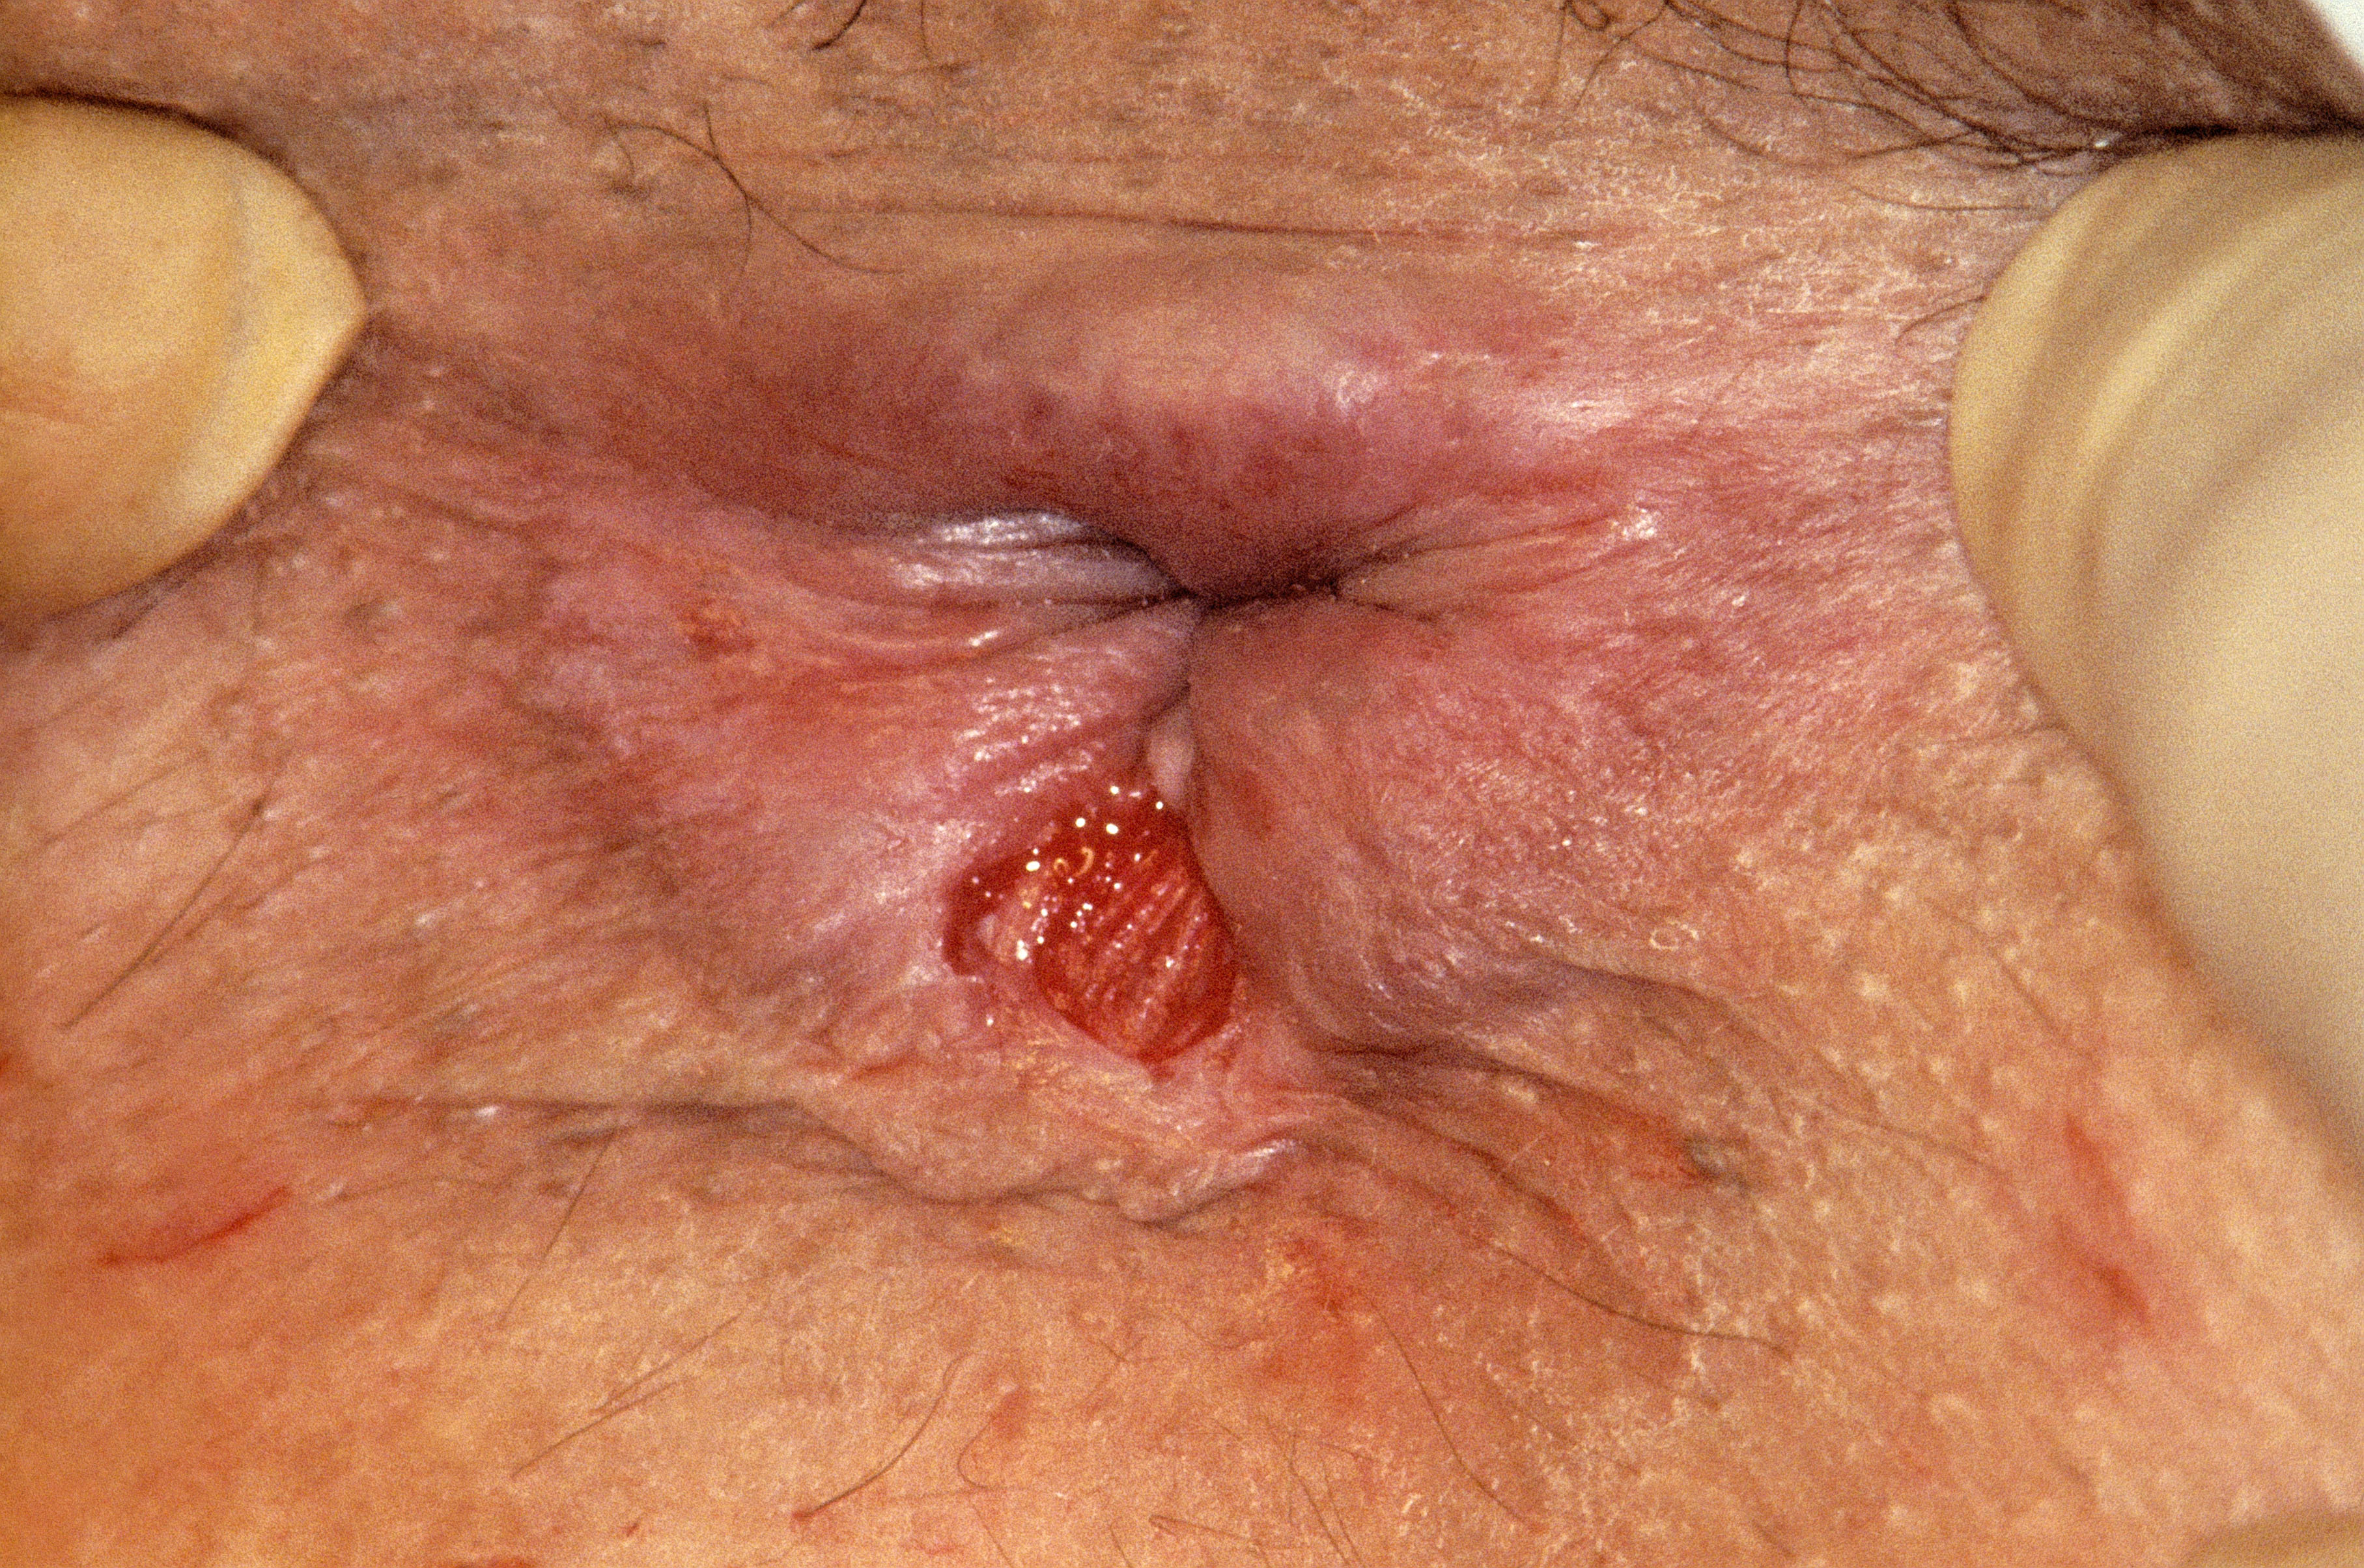 anal fissure image